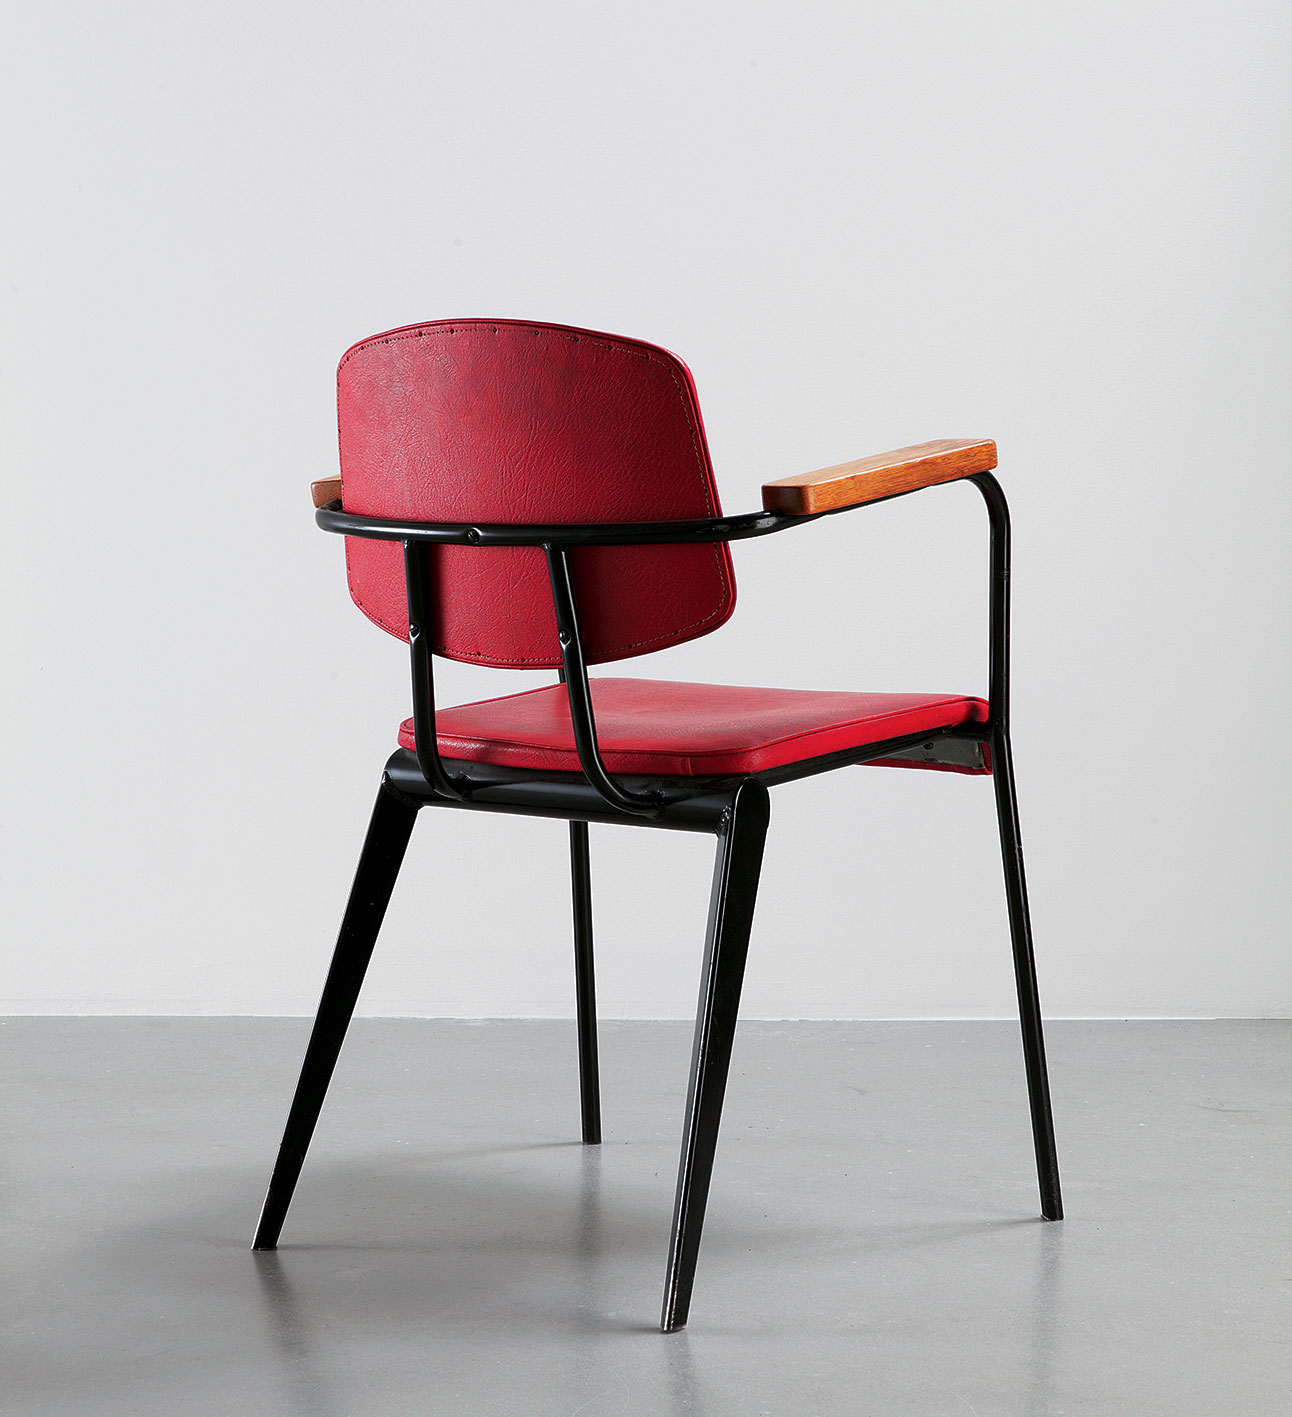 Conférence no 355 chair, 1954.